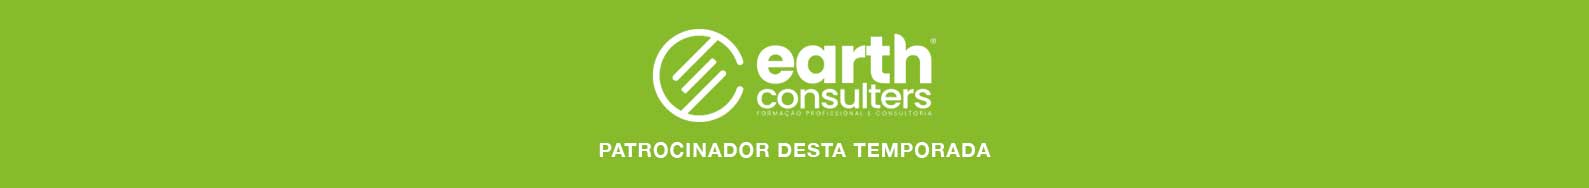 Earth Consultants